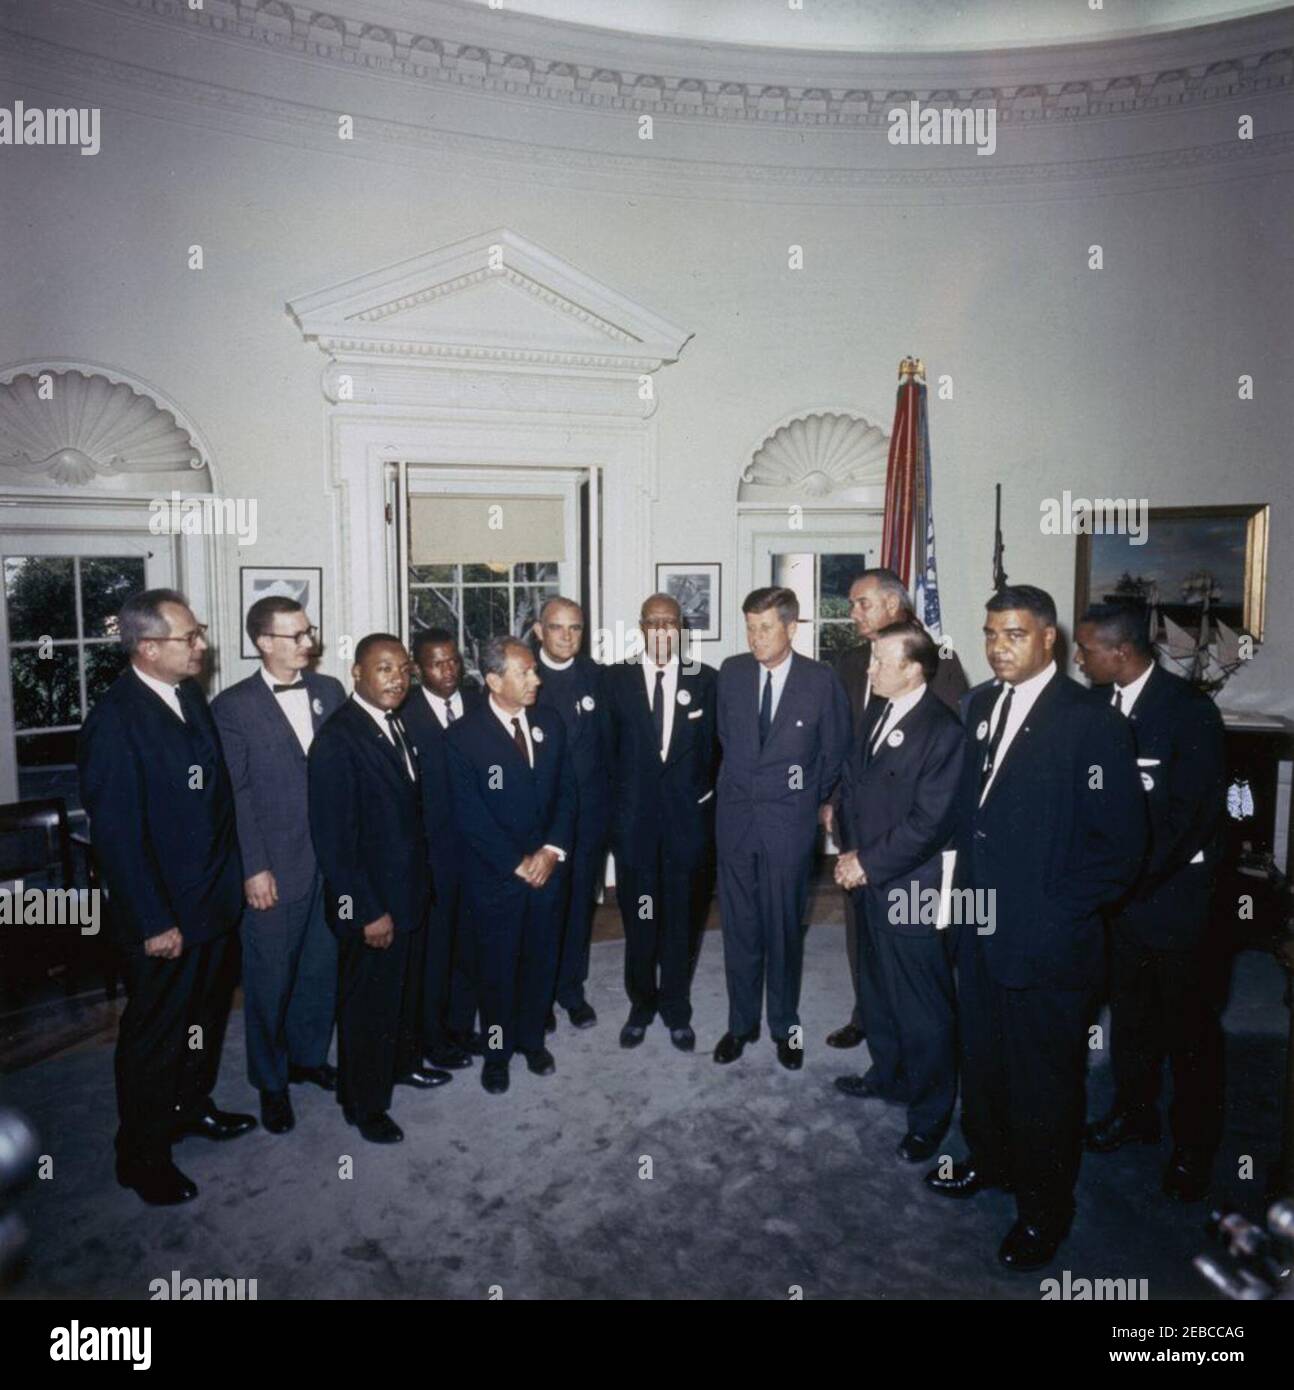 Meeting with the leaders of u0022The March on Washington for Jobs and Freedom,u0022 5:00PM. President John F. Kennedy and Vice President Lyndon B. Johnson meet with organizers of u0022The March on Washington for Jobs and Freedomu201d in the Oval Office, White House, Washington, D.C. Left to right: Secretary of Labor, Willard Wirtz; Executive Director of the National Catholic Conference for Interracial Justice, Mathew Ahmann; President of the Southern Christian Leadership Conference (SCLC), Dr. Martin Luther King, Jr.; representative for the Student Nonviolent Coordinating Committee (SNCC), Stock Photo